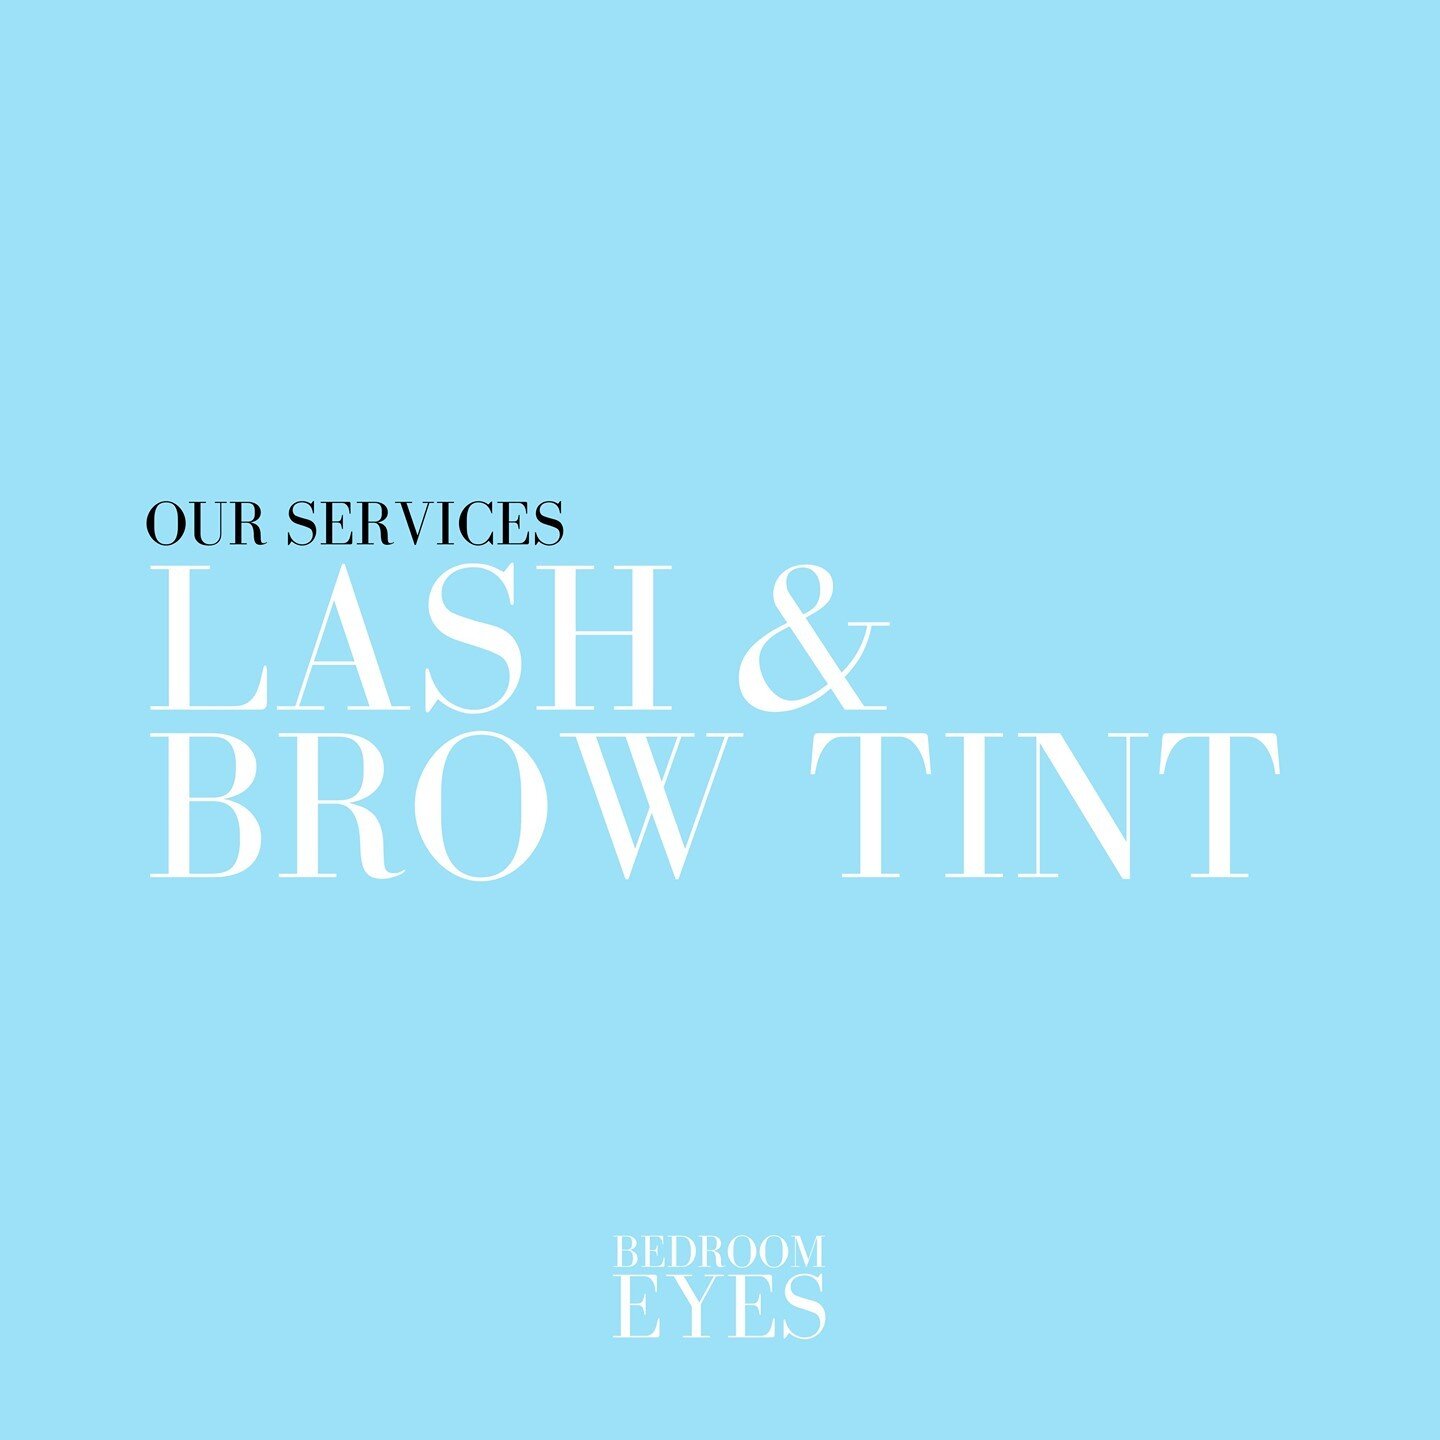 Pamper yourself with a LASH &amp; BROW TINT, from $39. ⁠
⁠
Our tints can be paired with lash lifts as well. Please visit our booking website to see all treatments and pricing. ⁠
⁠
⁠
⁠
⁠
⁠
#bedroomeyesmelbourne #bedroomeyesfitzroy #melbournebeauty #be